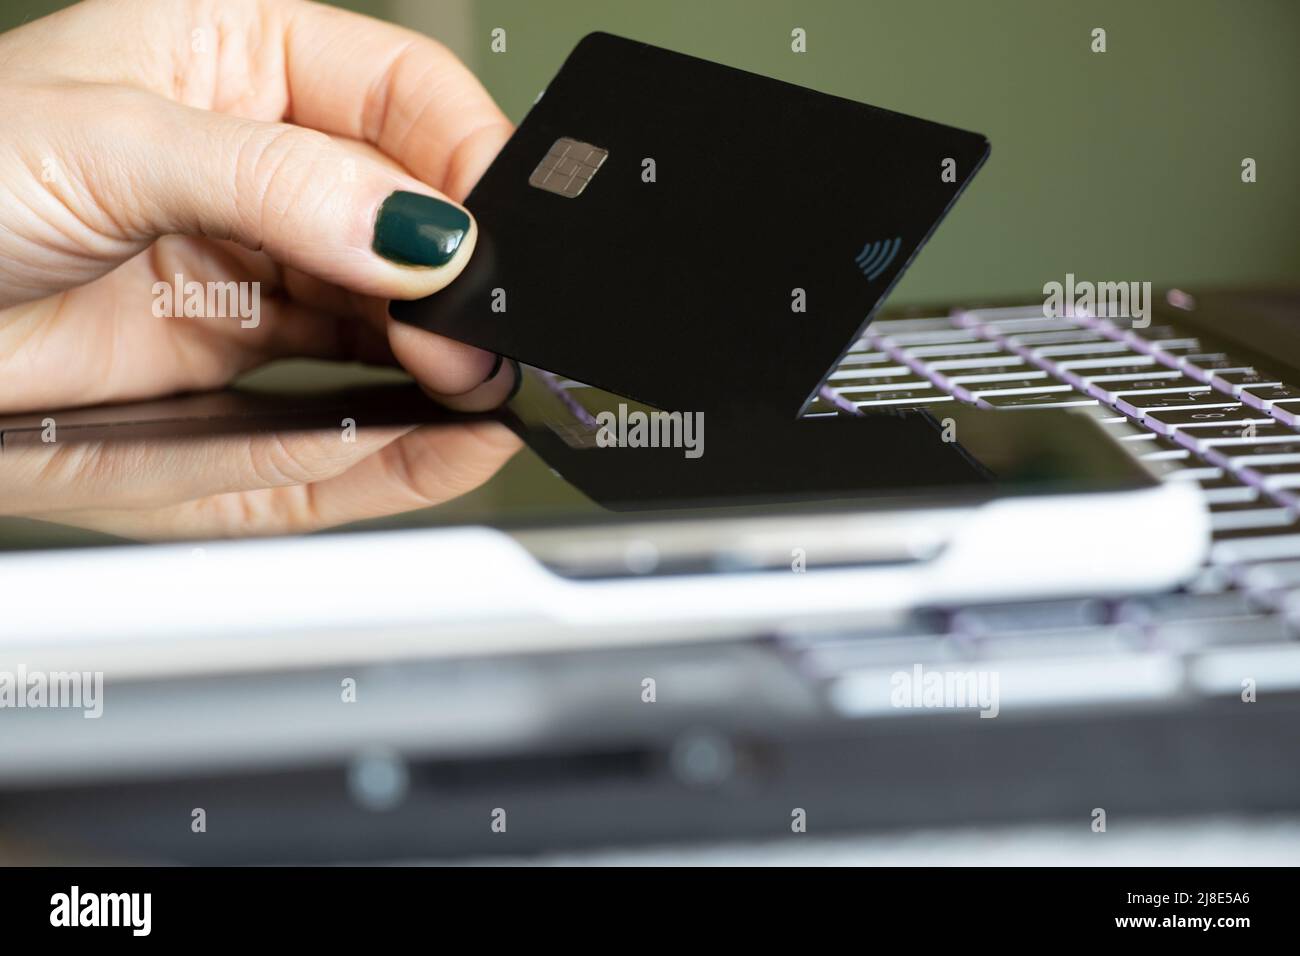 A girl holds a credit bank card in her hands next to a black laptop and a phone in the office by the window, online payment, payment by card Stock Photo